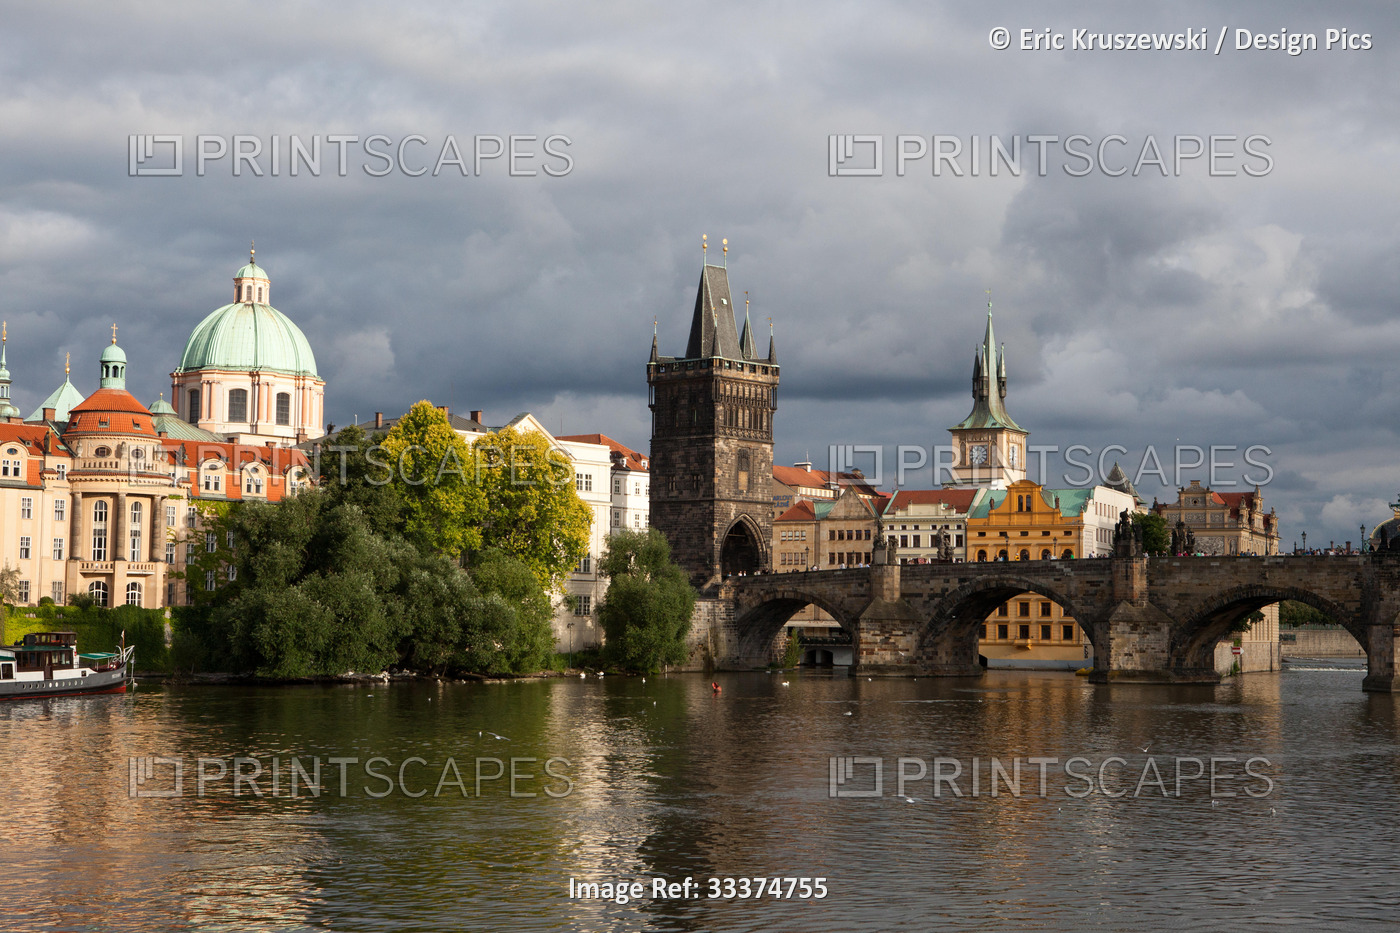 From the Vltava River, a view of the Charles Bridge and The Old Town in ...